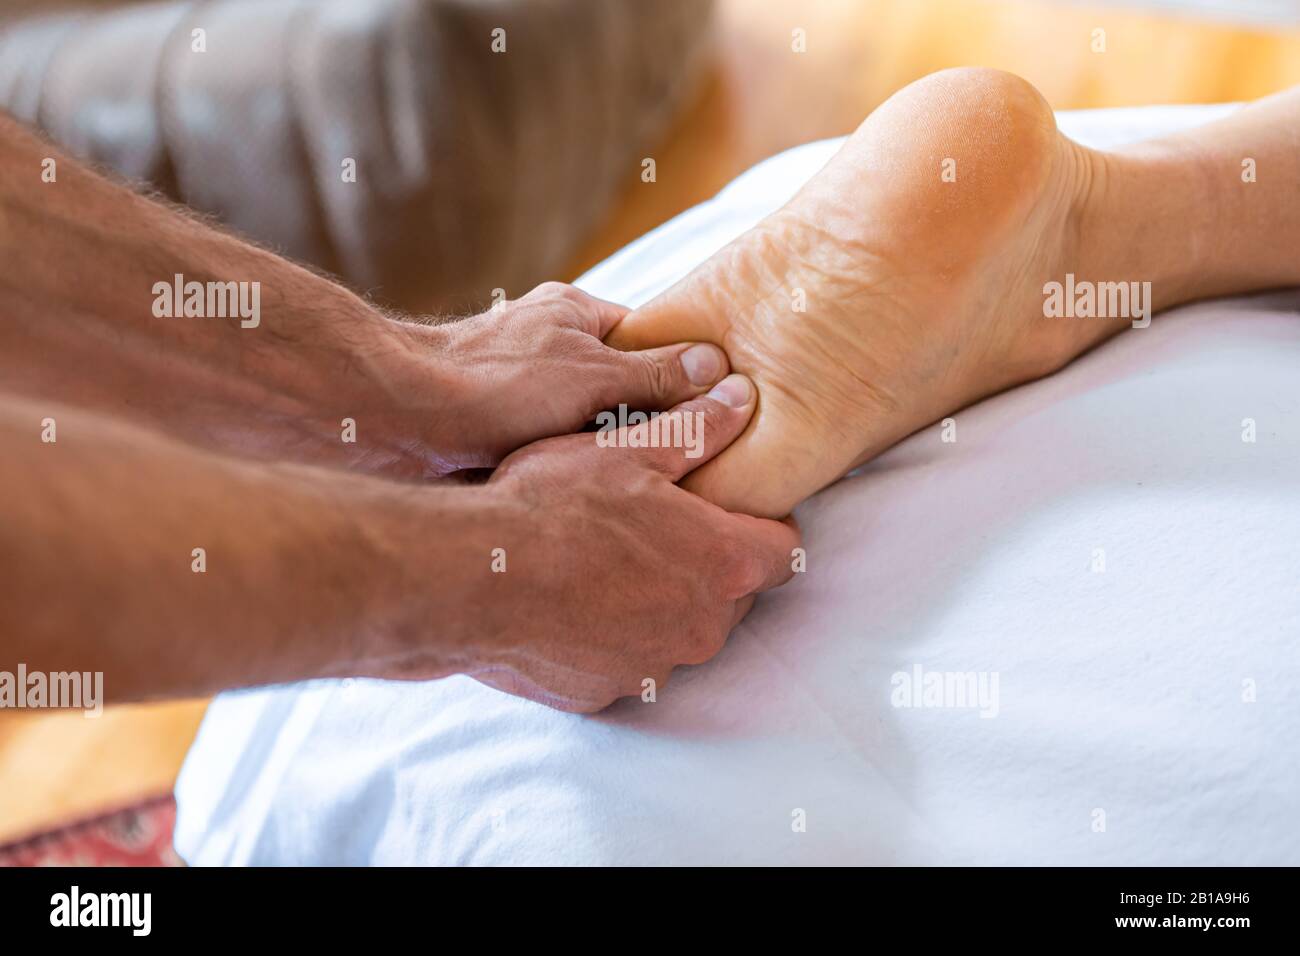 https://c8.alamy.com/comp/2B1A9H6/young-man-having-feet-massage-in-the-spa-salon-sports-massage-close-up-view-of-masseur-hands-giving-treating-massage-to-his-patient-2B1A9H6.jpg